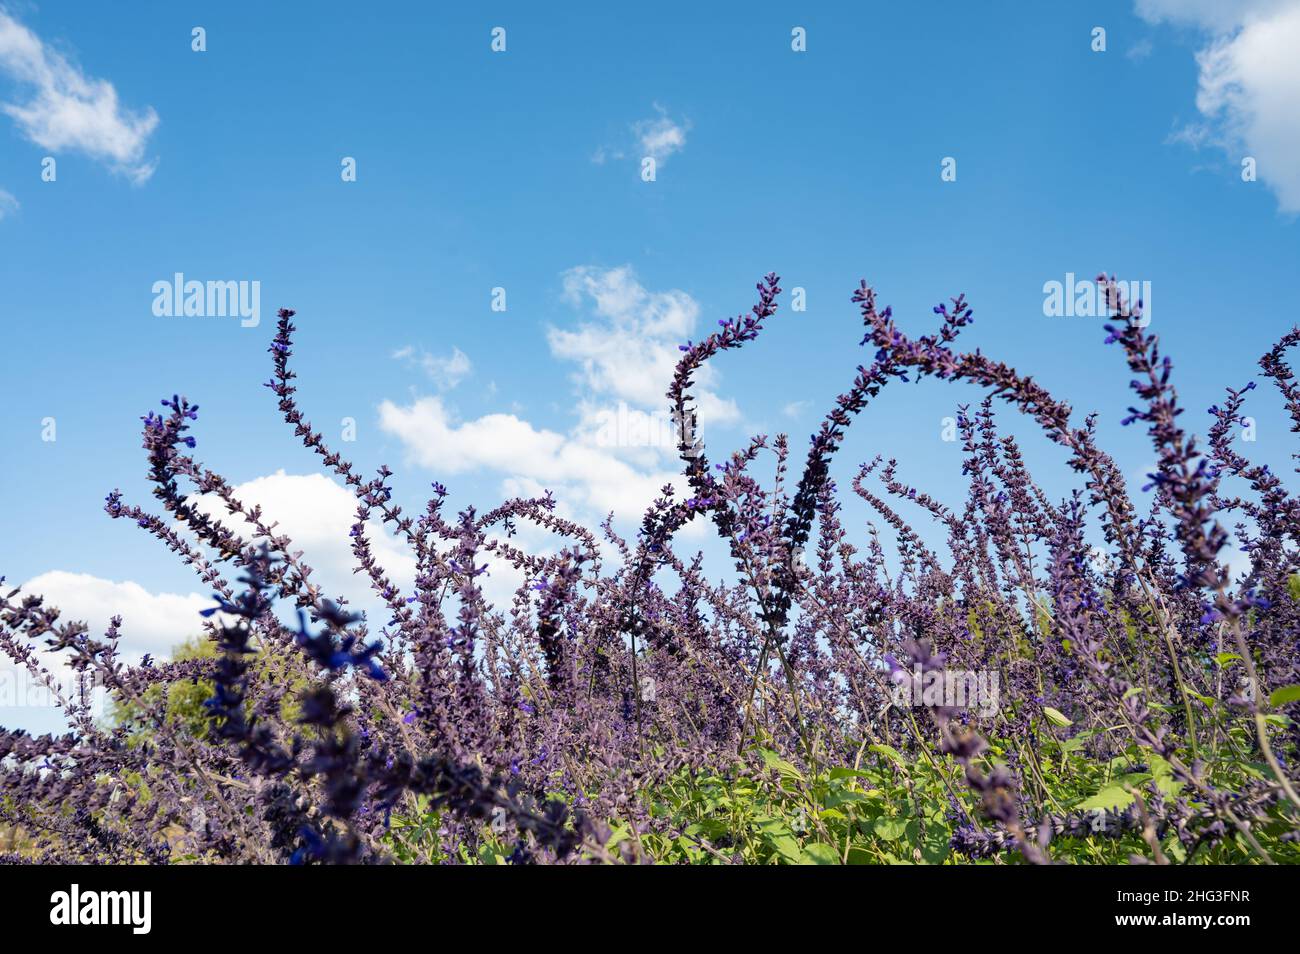 Mystic spires blue sage flowers and blue sky with clouds. Stock Photo